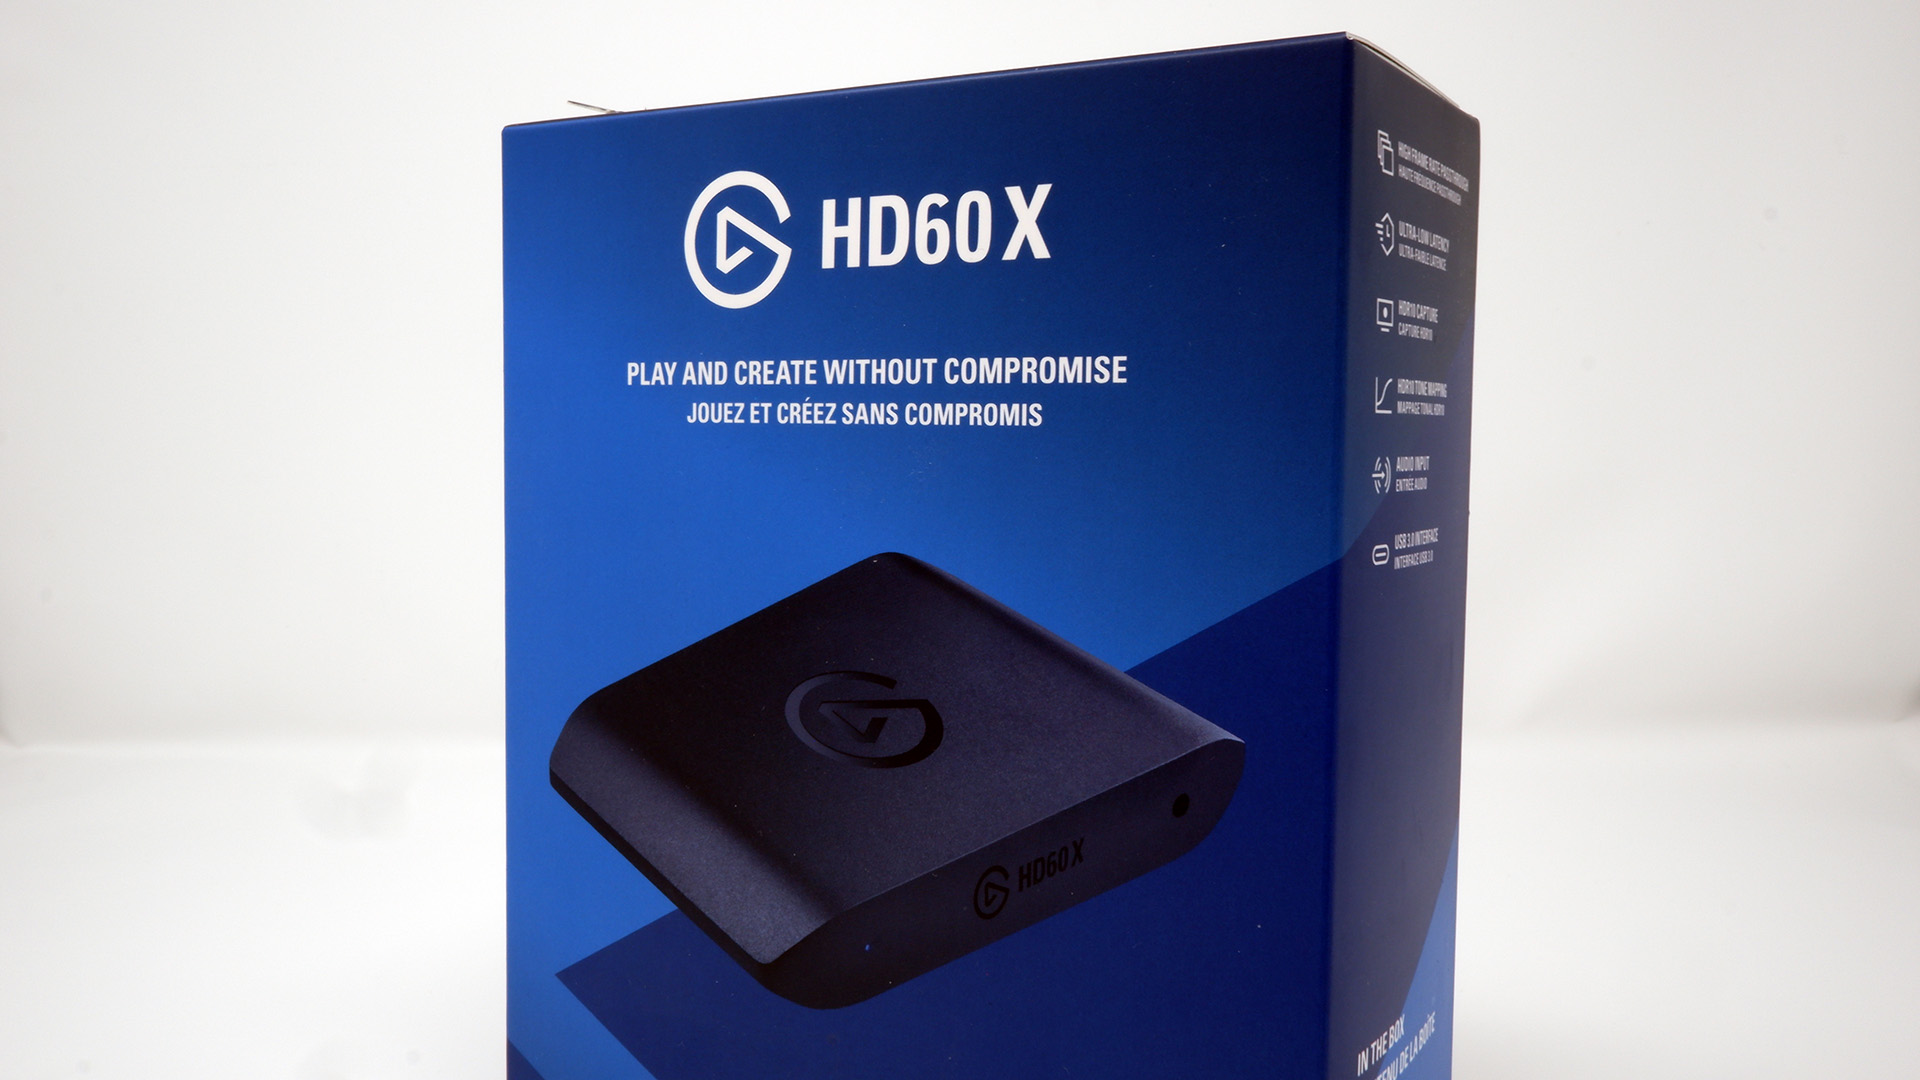 Elgato HD60 X capture card with box and cables